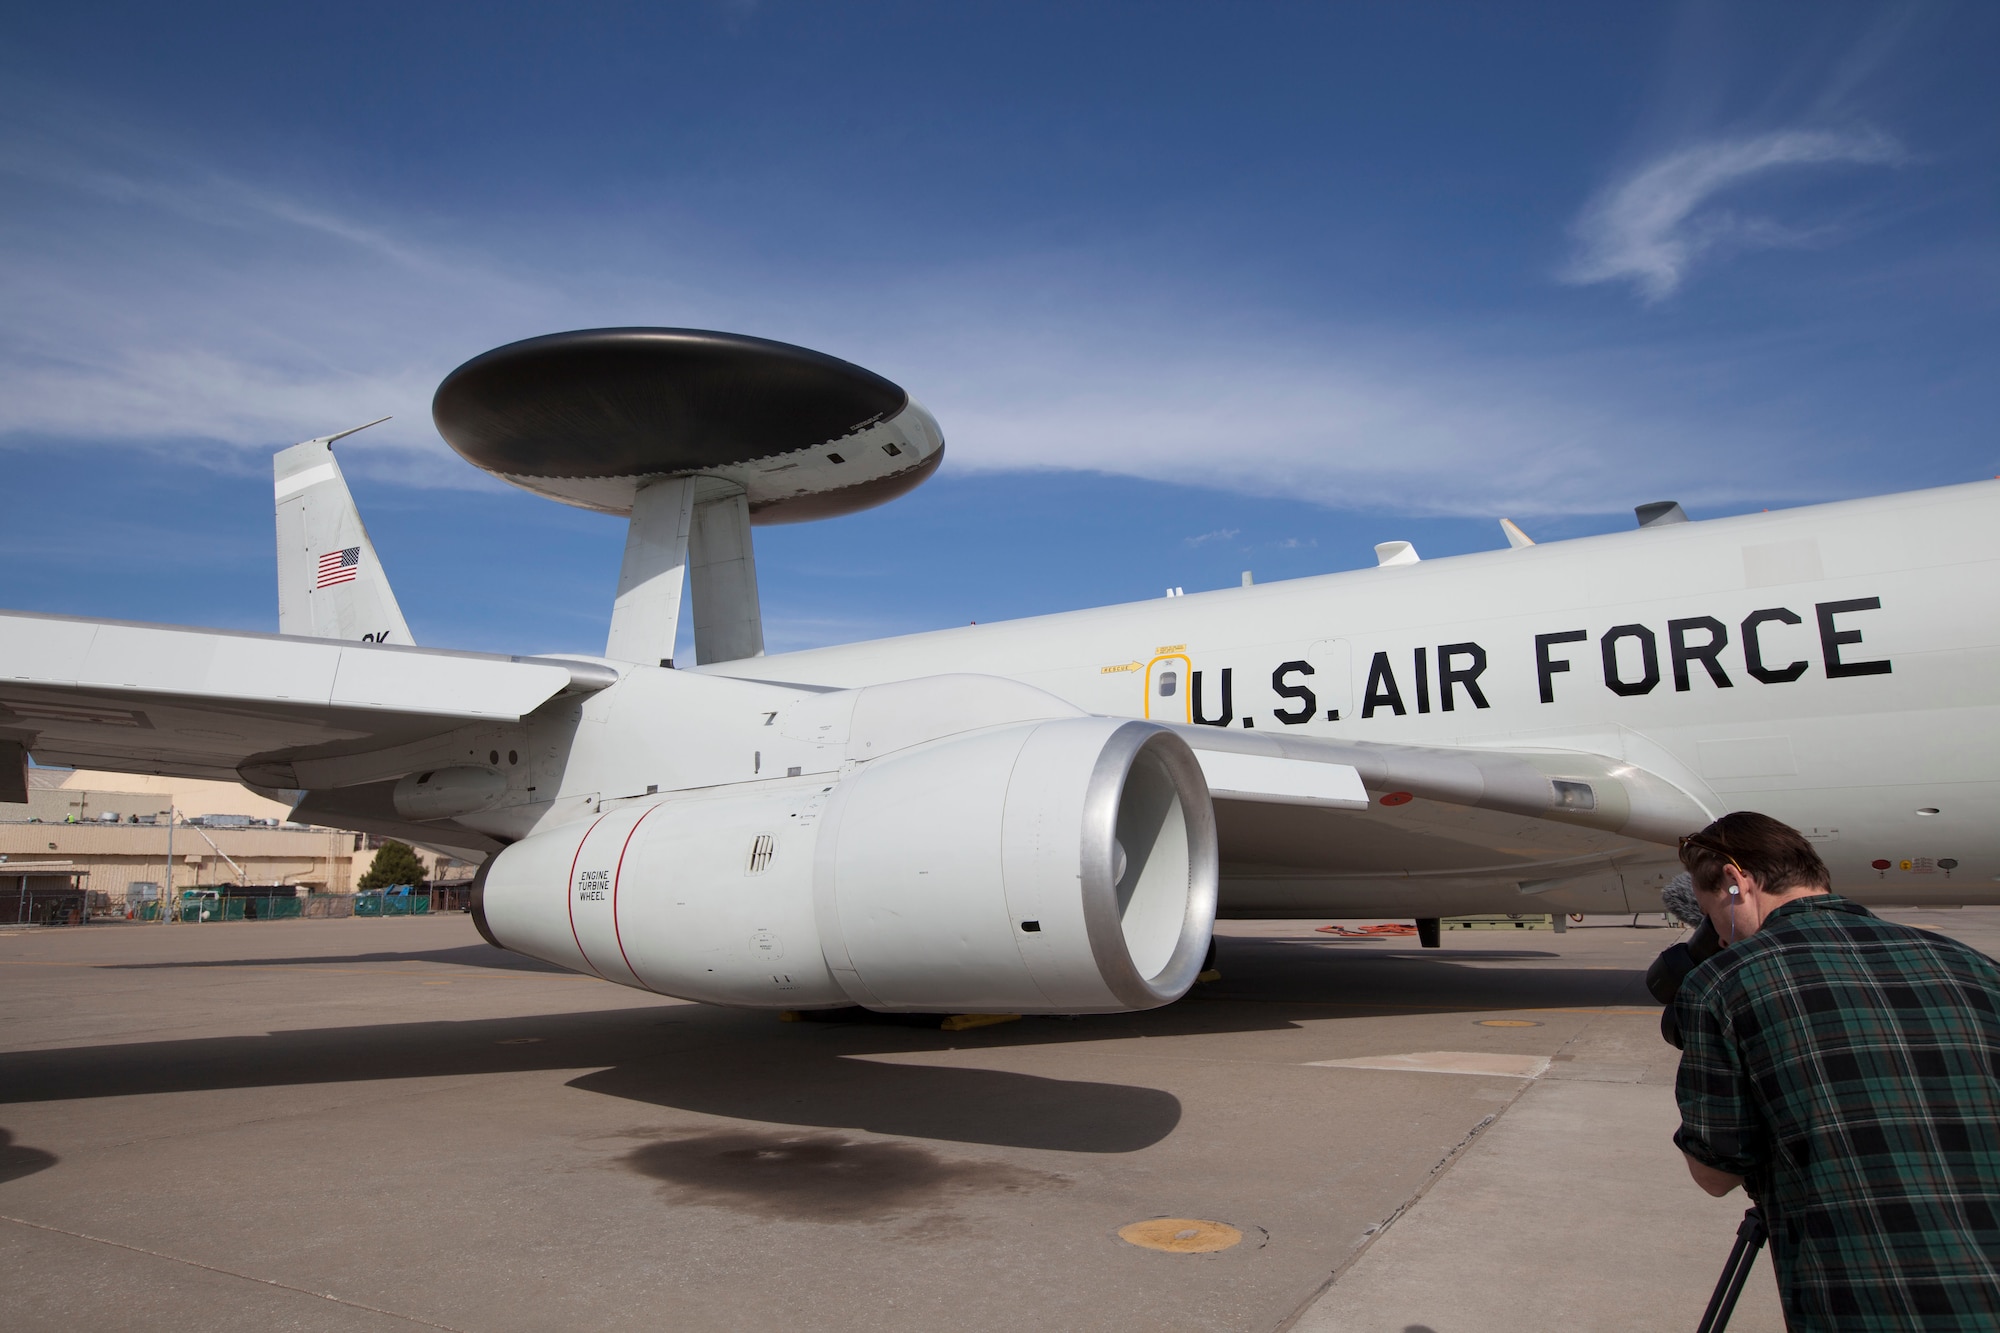 Cory Johnson from the popular television show “The Aviators” takes video of a E-3 Sentry. The crew came to Tinker Air Force Base March 20-21 to feature the KC-135 and E-3 missions for an episode to air in October. (Photo by Megen Andersen)